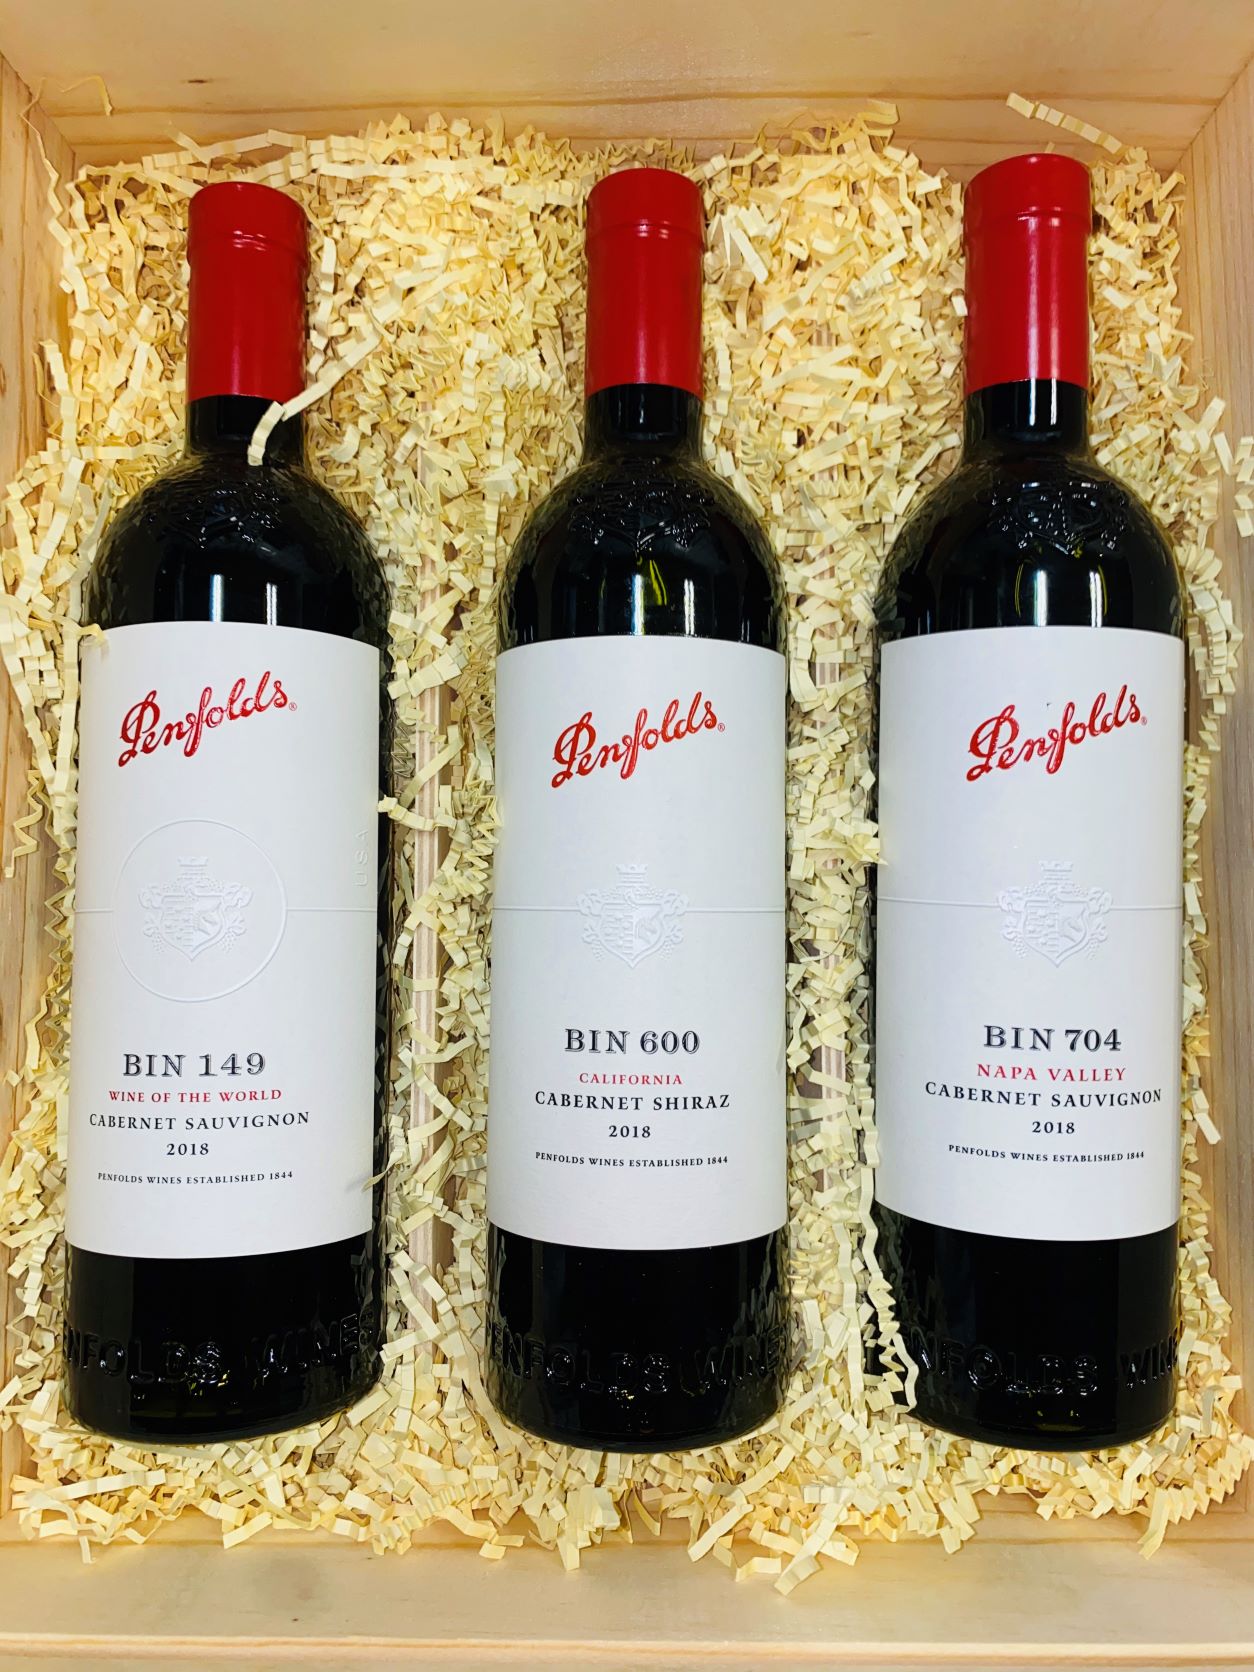 Penfolds New California Collaboration Three Pack #23C8 - click image for full description